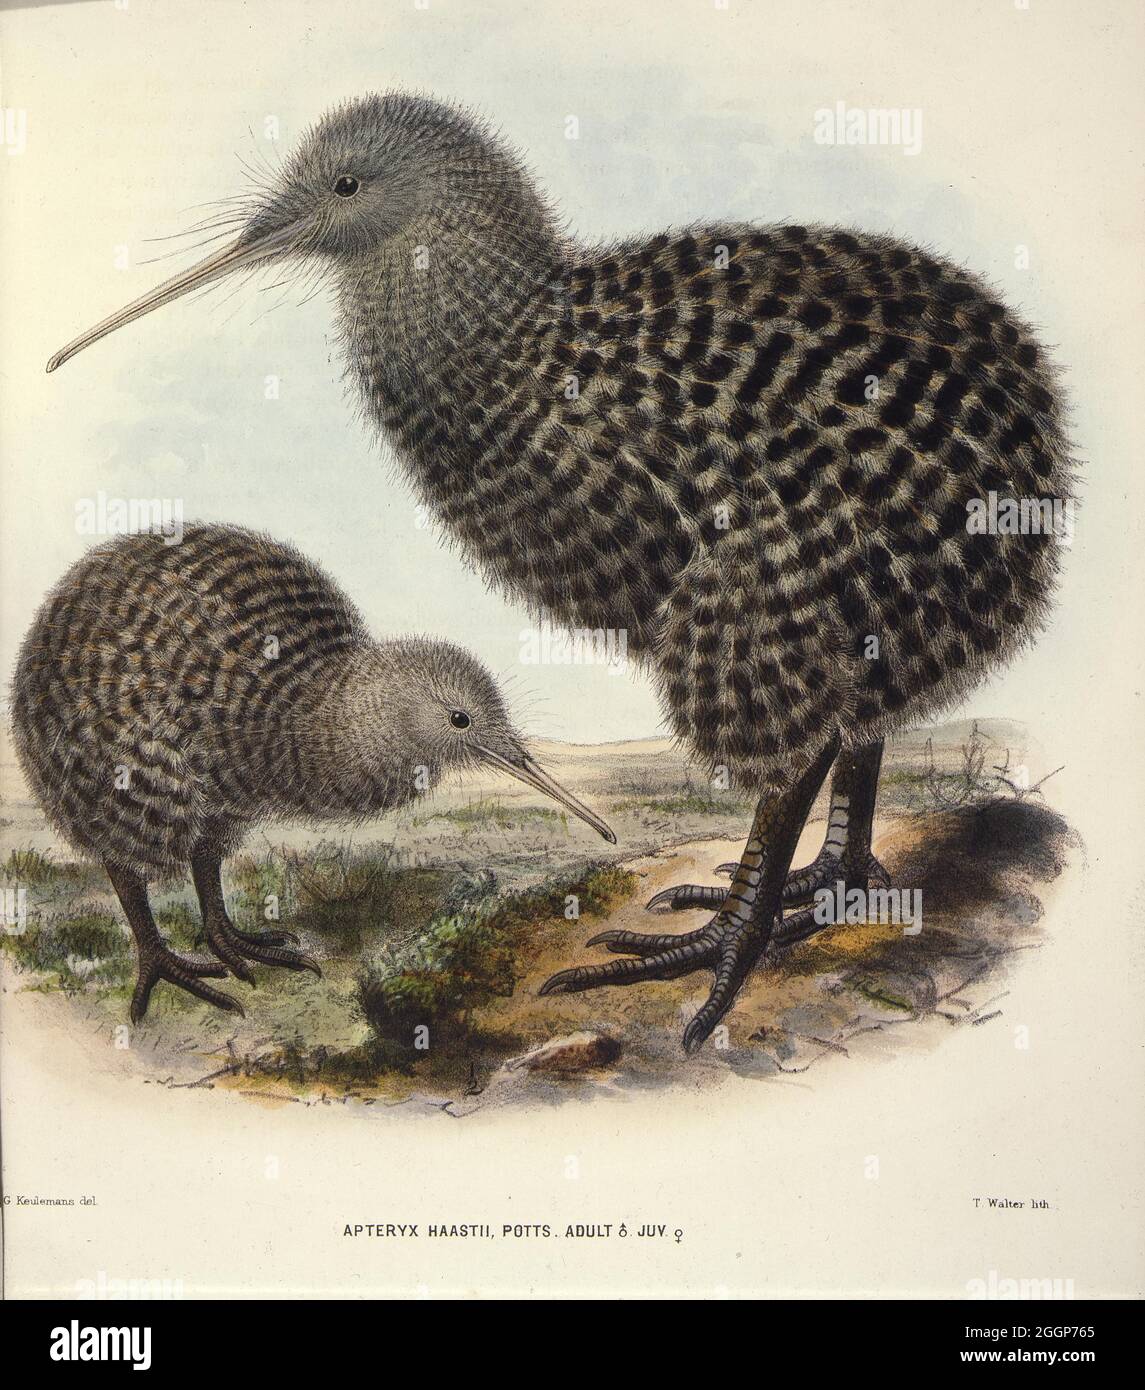 Shows an adult male little spotted kiwi viewed from the side, with a juvenile female, both in an open landscape. Stock Photo